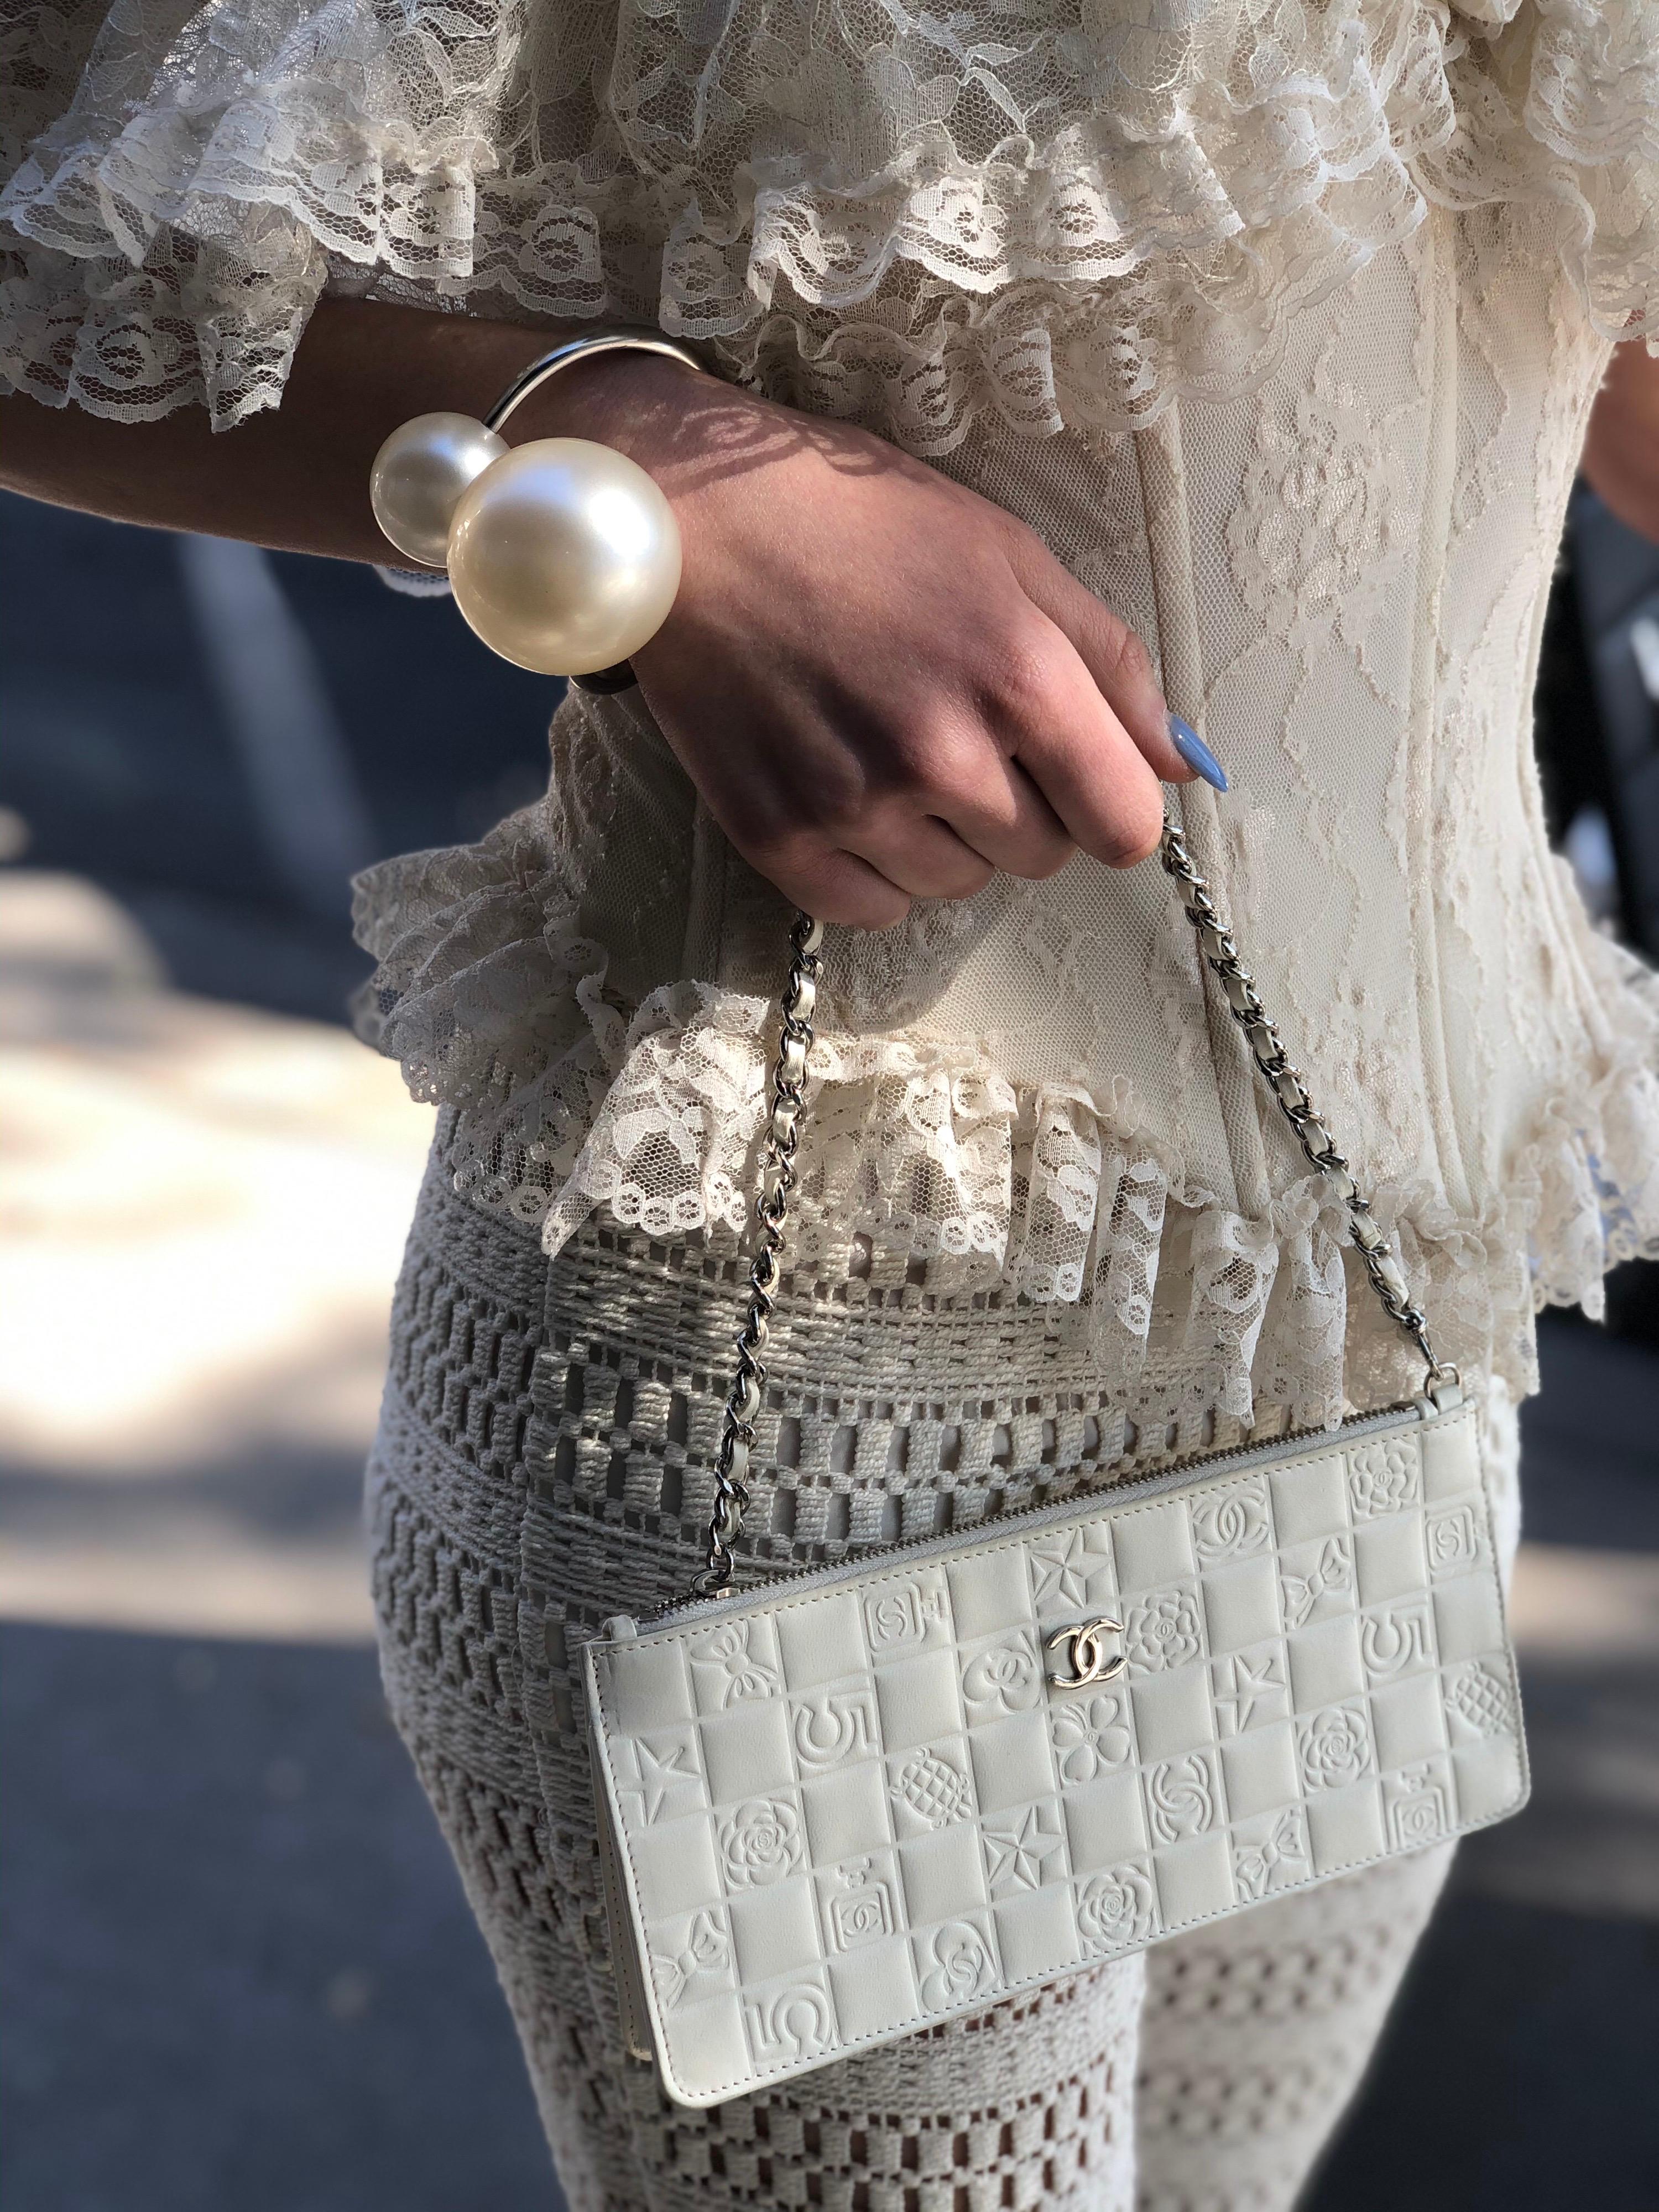 Feel lucky with this adorable Chanel wristlet! Circa 2005 from their Spring collection, this Chanel white wristlet is the perfect addition to any look, dressy or casual. Features a white leather and chain strap, top zipper closure, and is fully